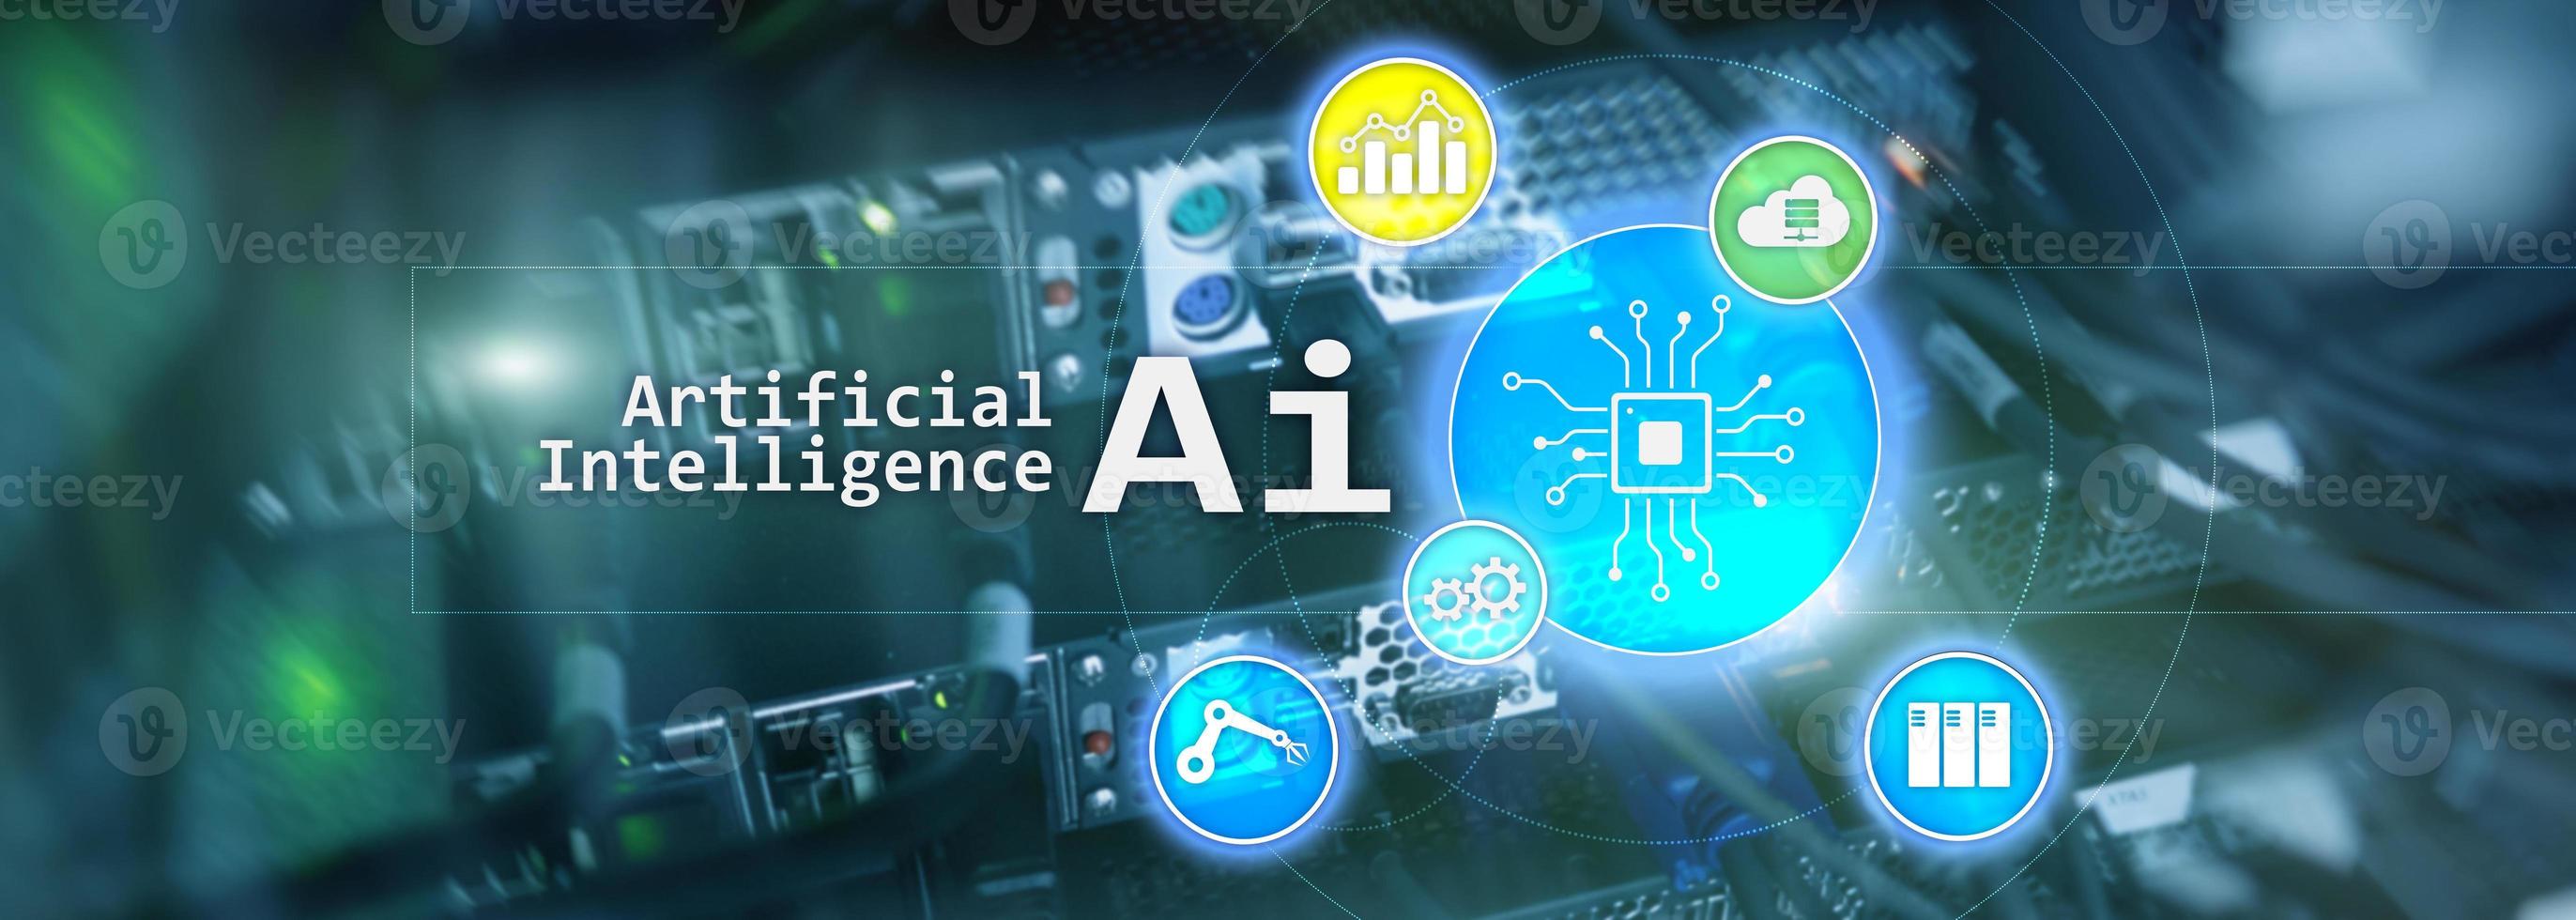 AI, Artificial intelligence, automation and modern information technology concept on virtual screen. photo